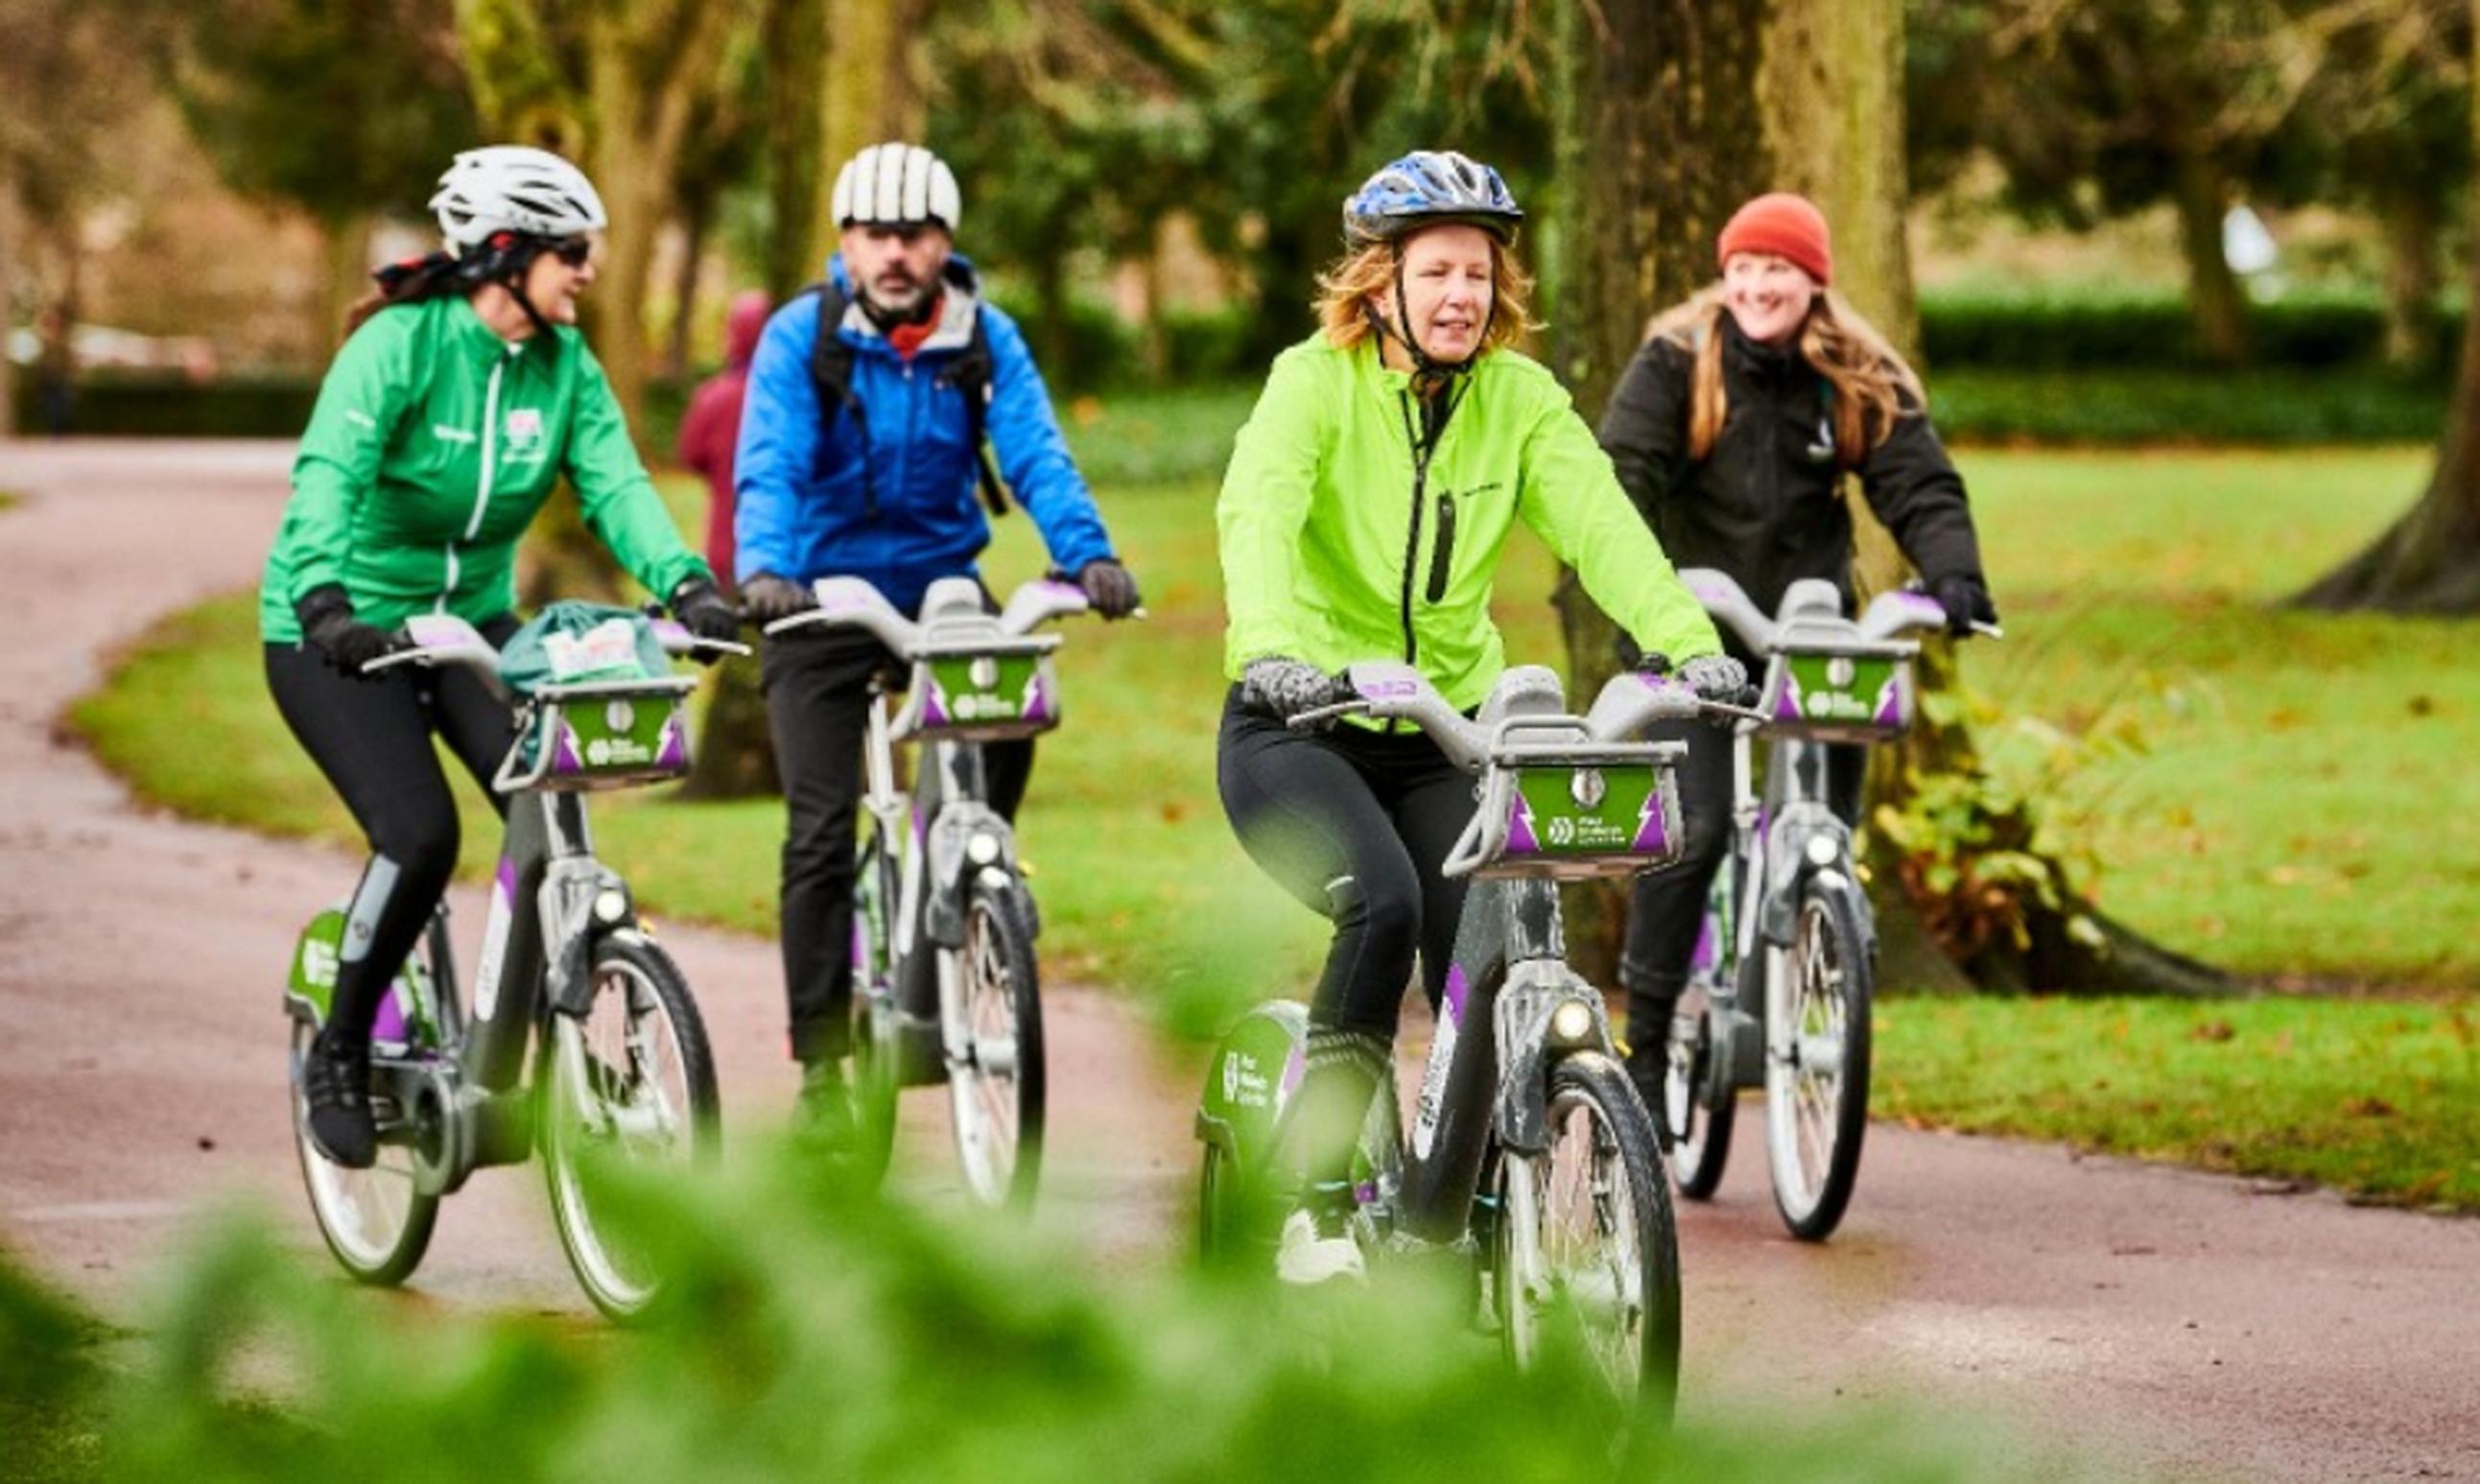 A fleet of 150 e-bikes are available to hire across the West Midlands